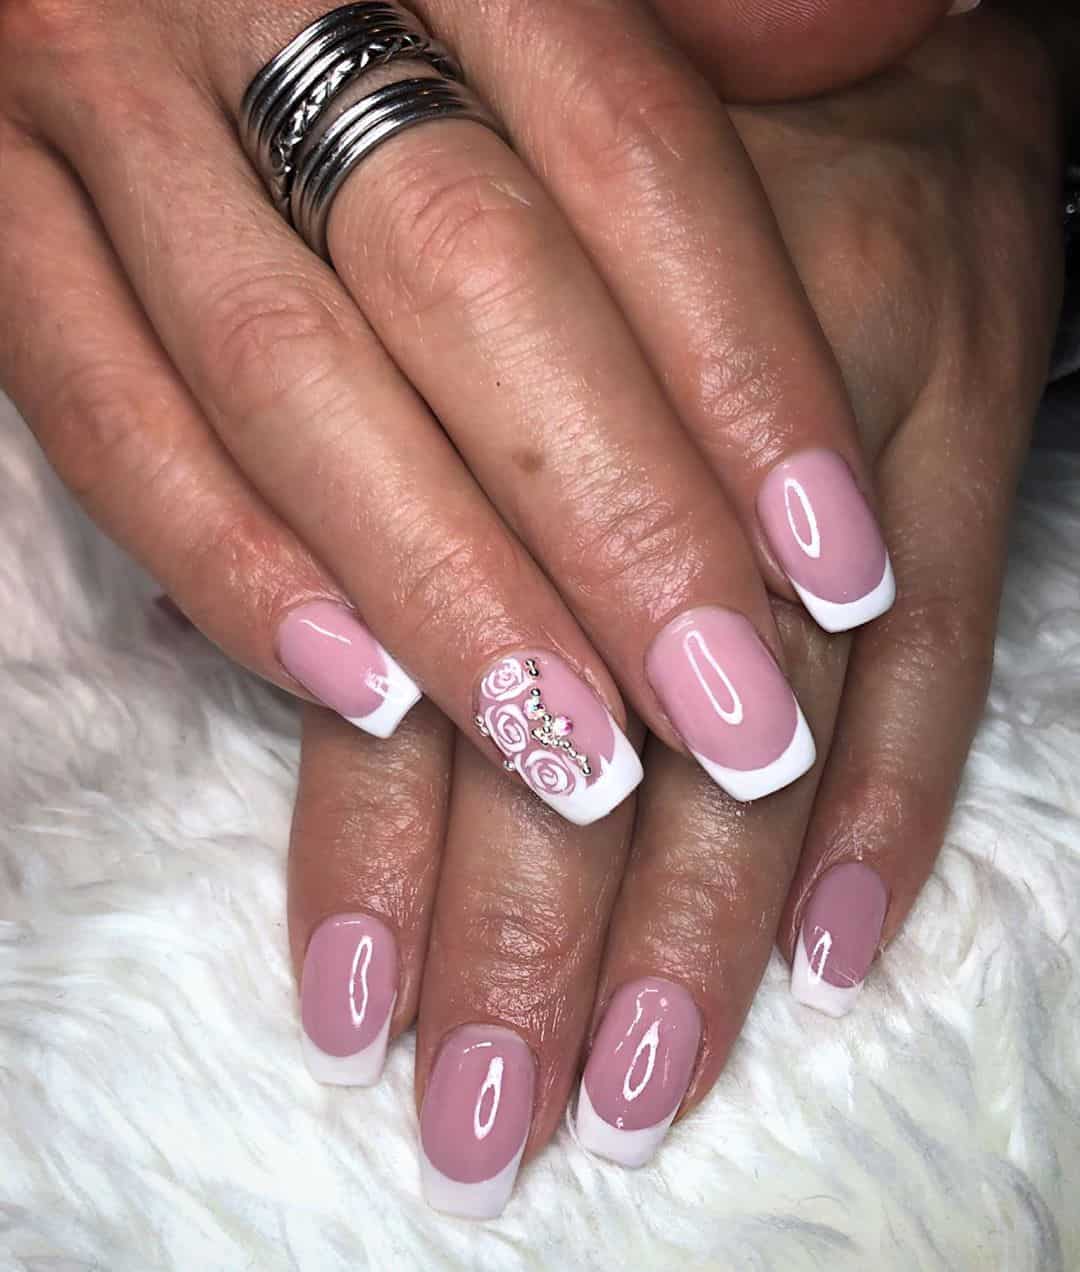 This blog post will give you the best nail ideas for your wedding day. Hope to inspired you and help you choose the nail